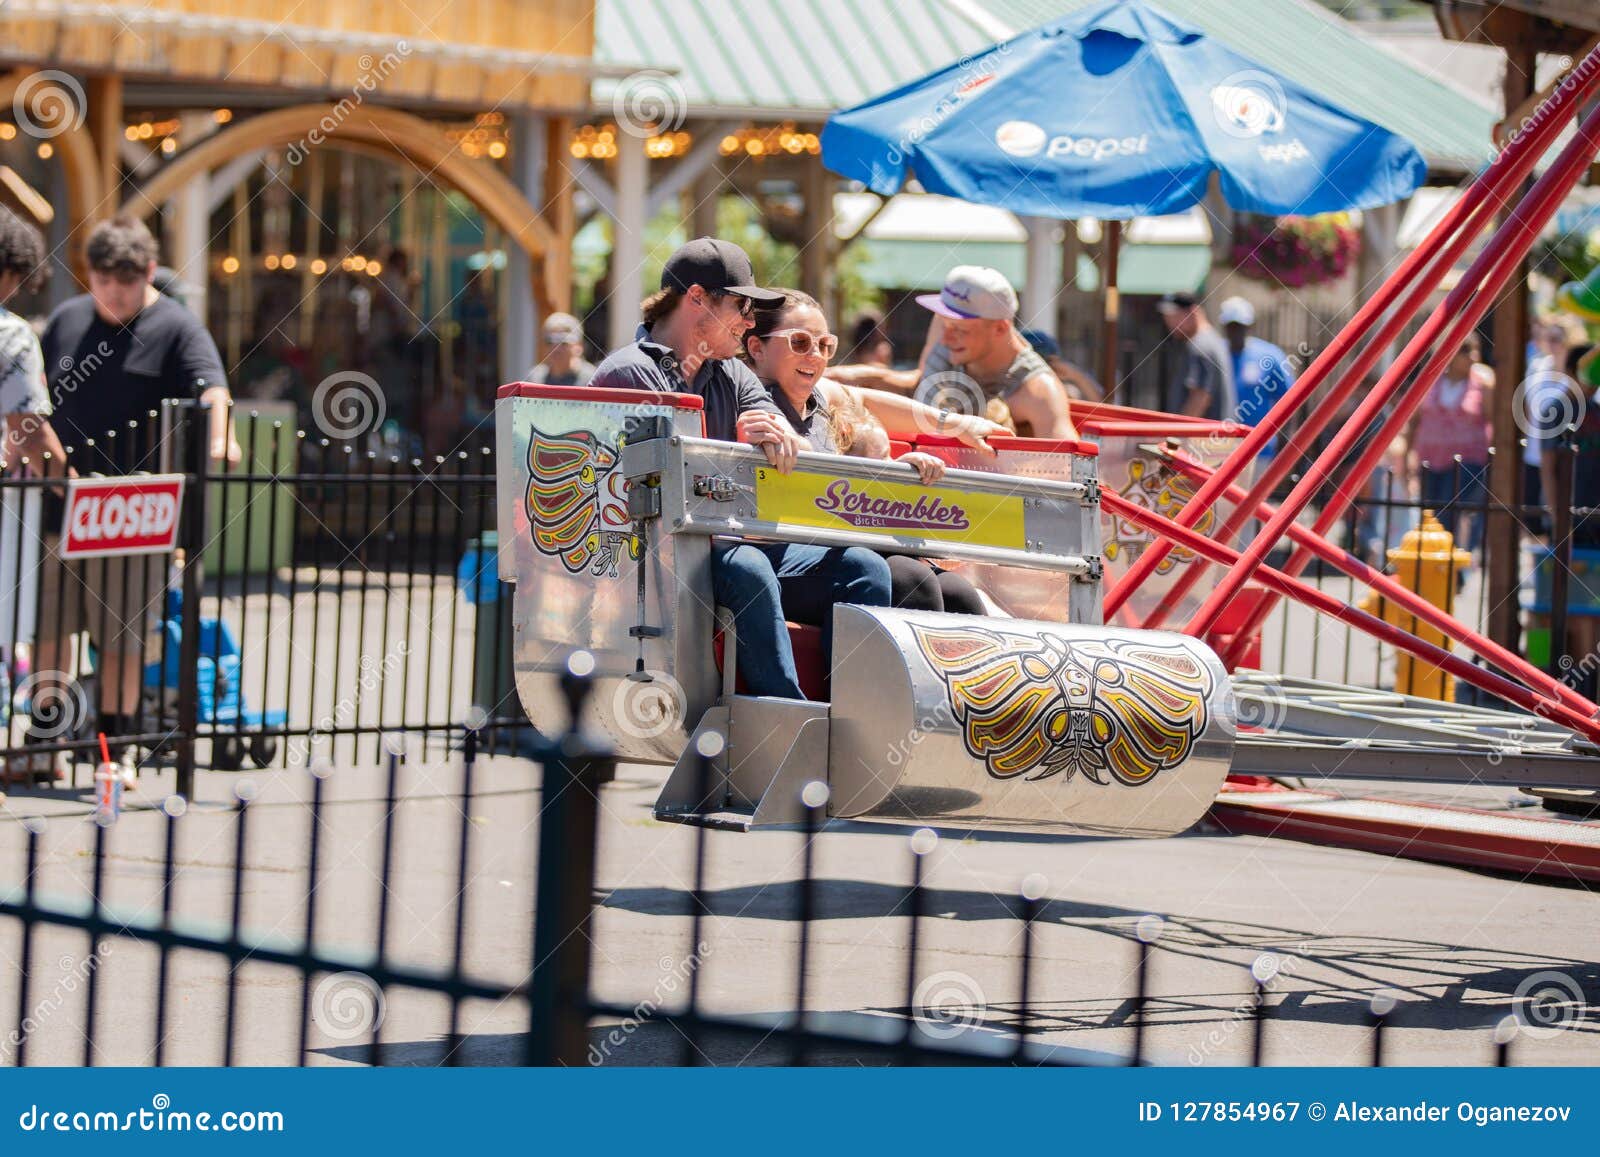 Family On The Fast Amusement Ride Editorial Photography Image Of Exciting Carousel